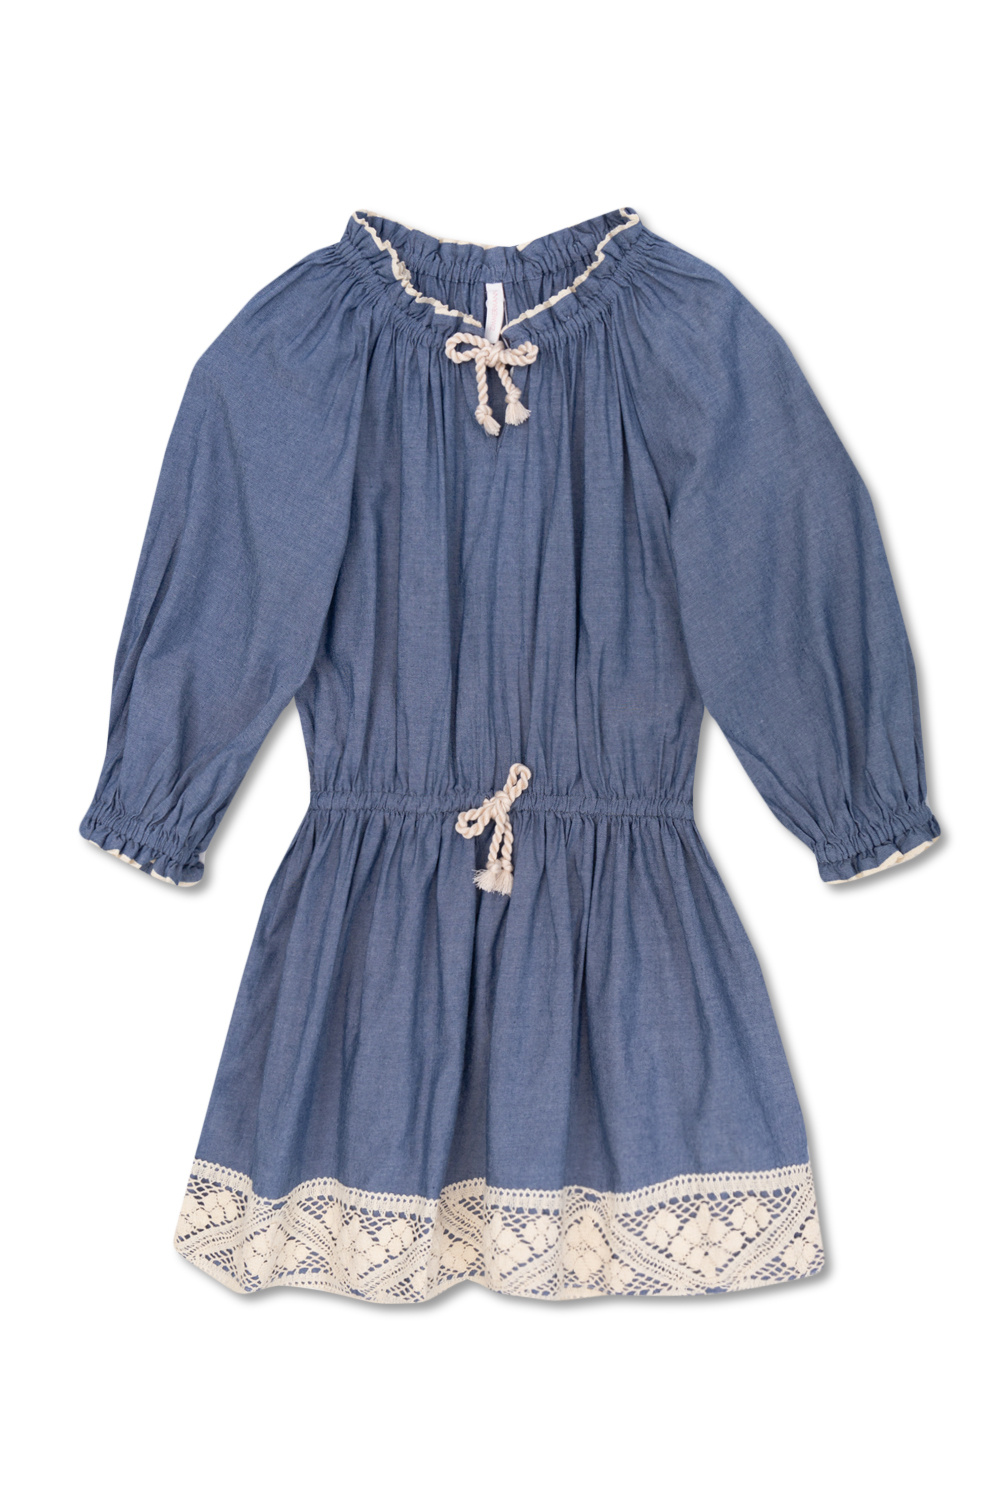 Zimmermann Kids Dress with long sleeves